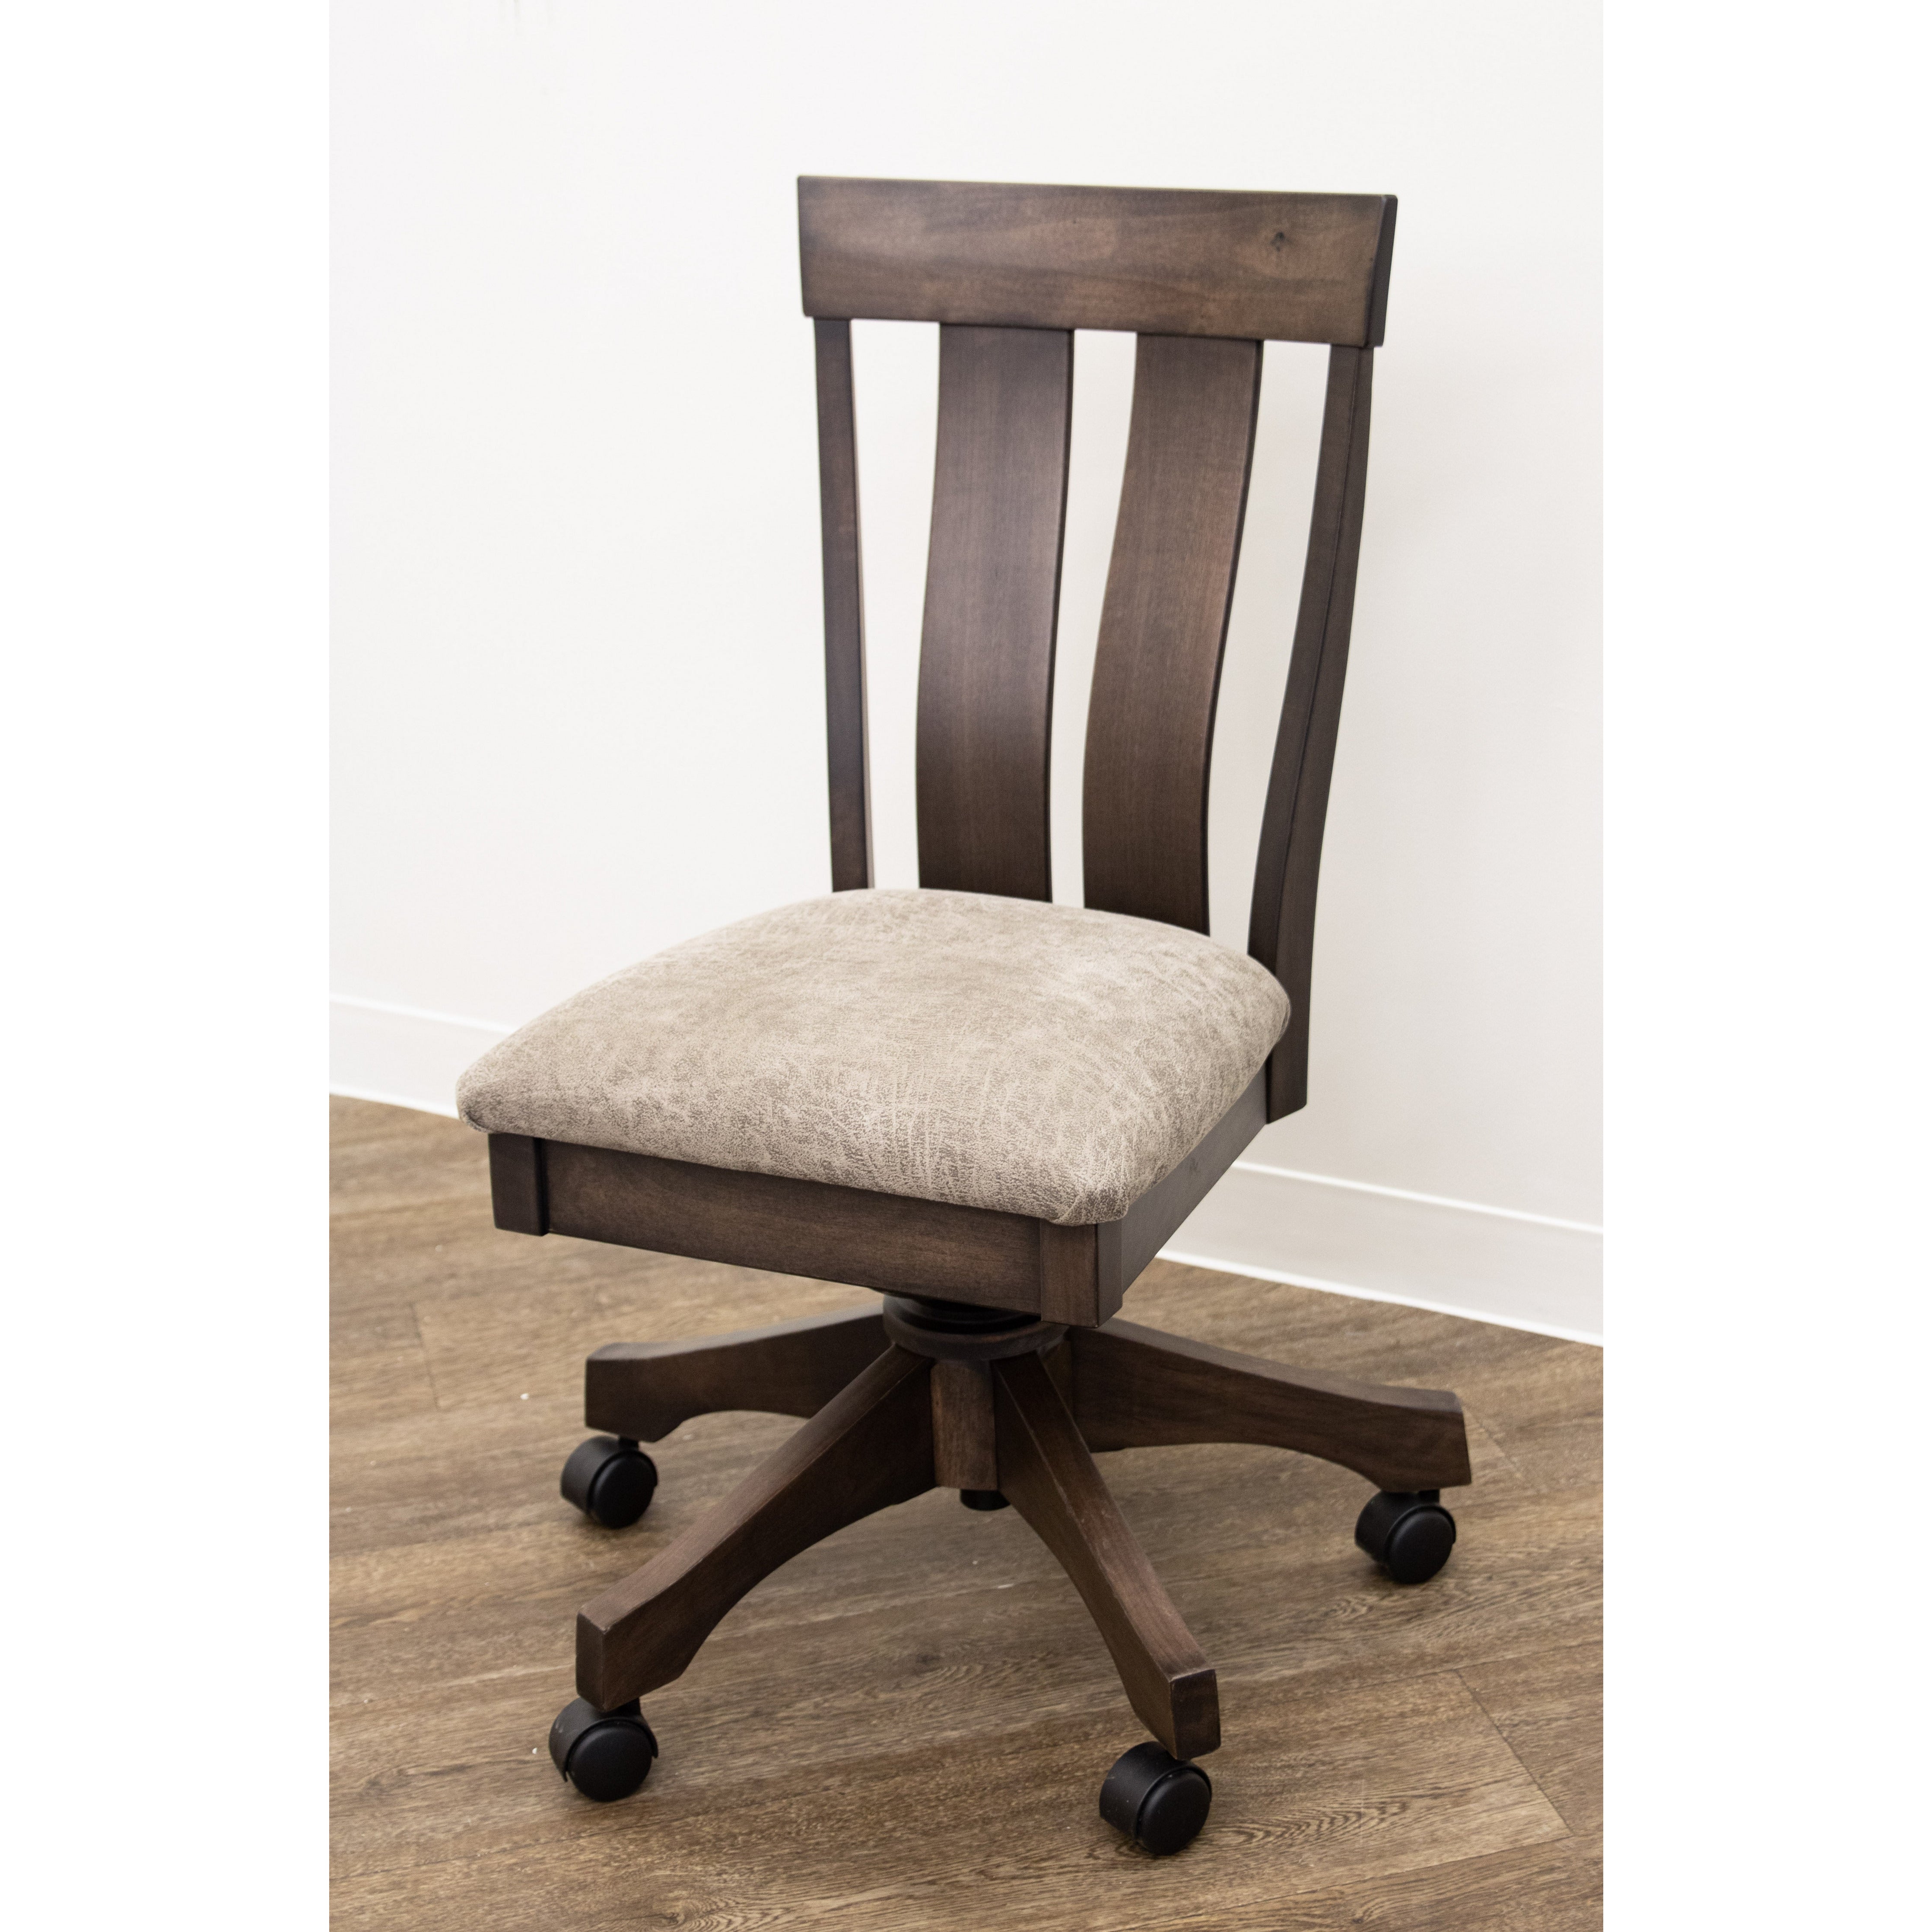 Kinglet Office Chair with Fabric Seat